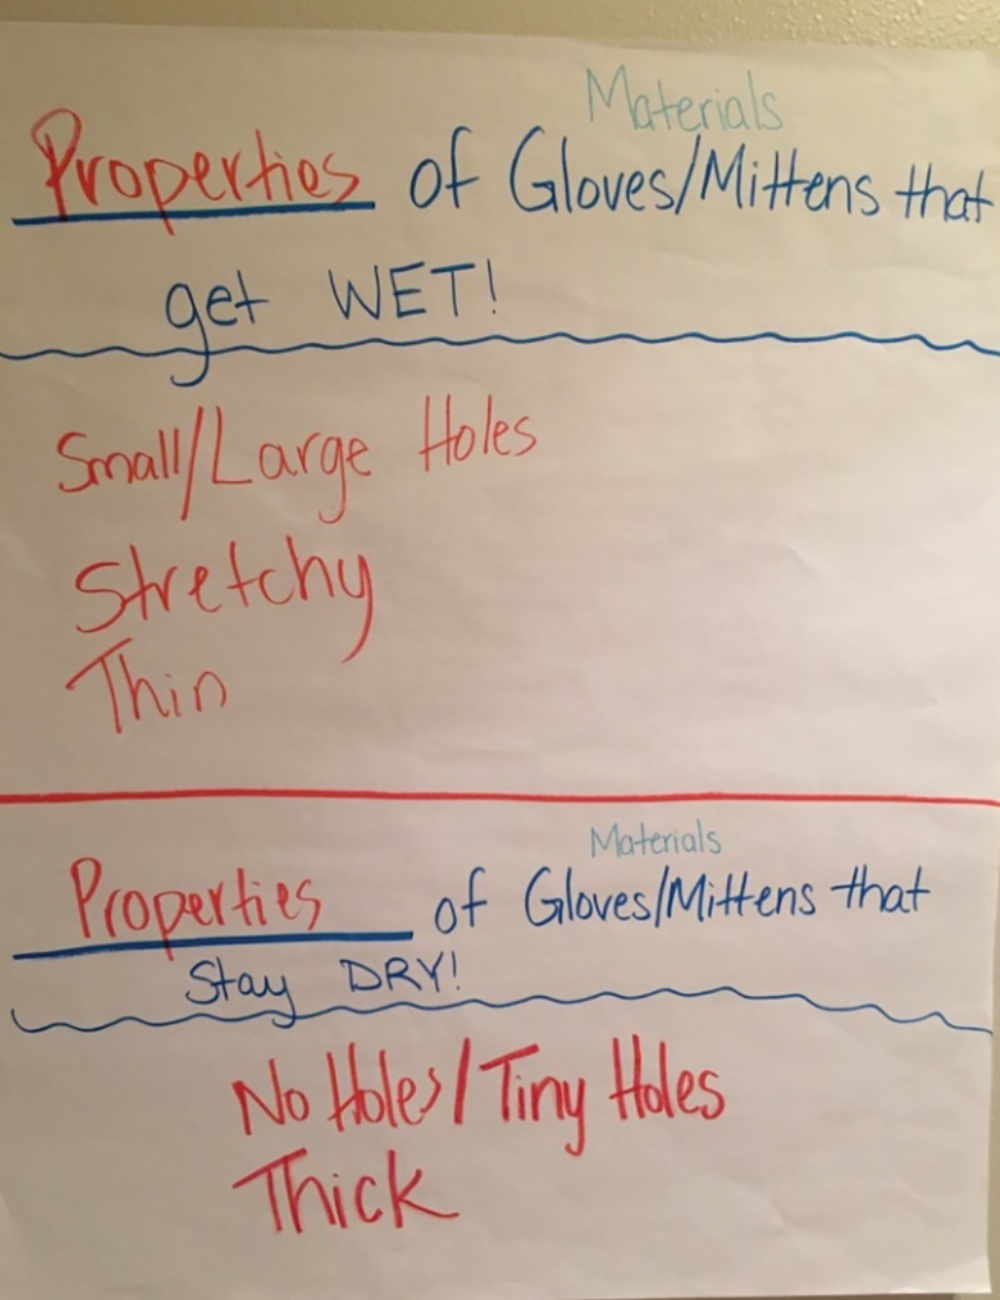 Properties of gloves/mittens that get wet and stay dry.